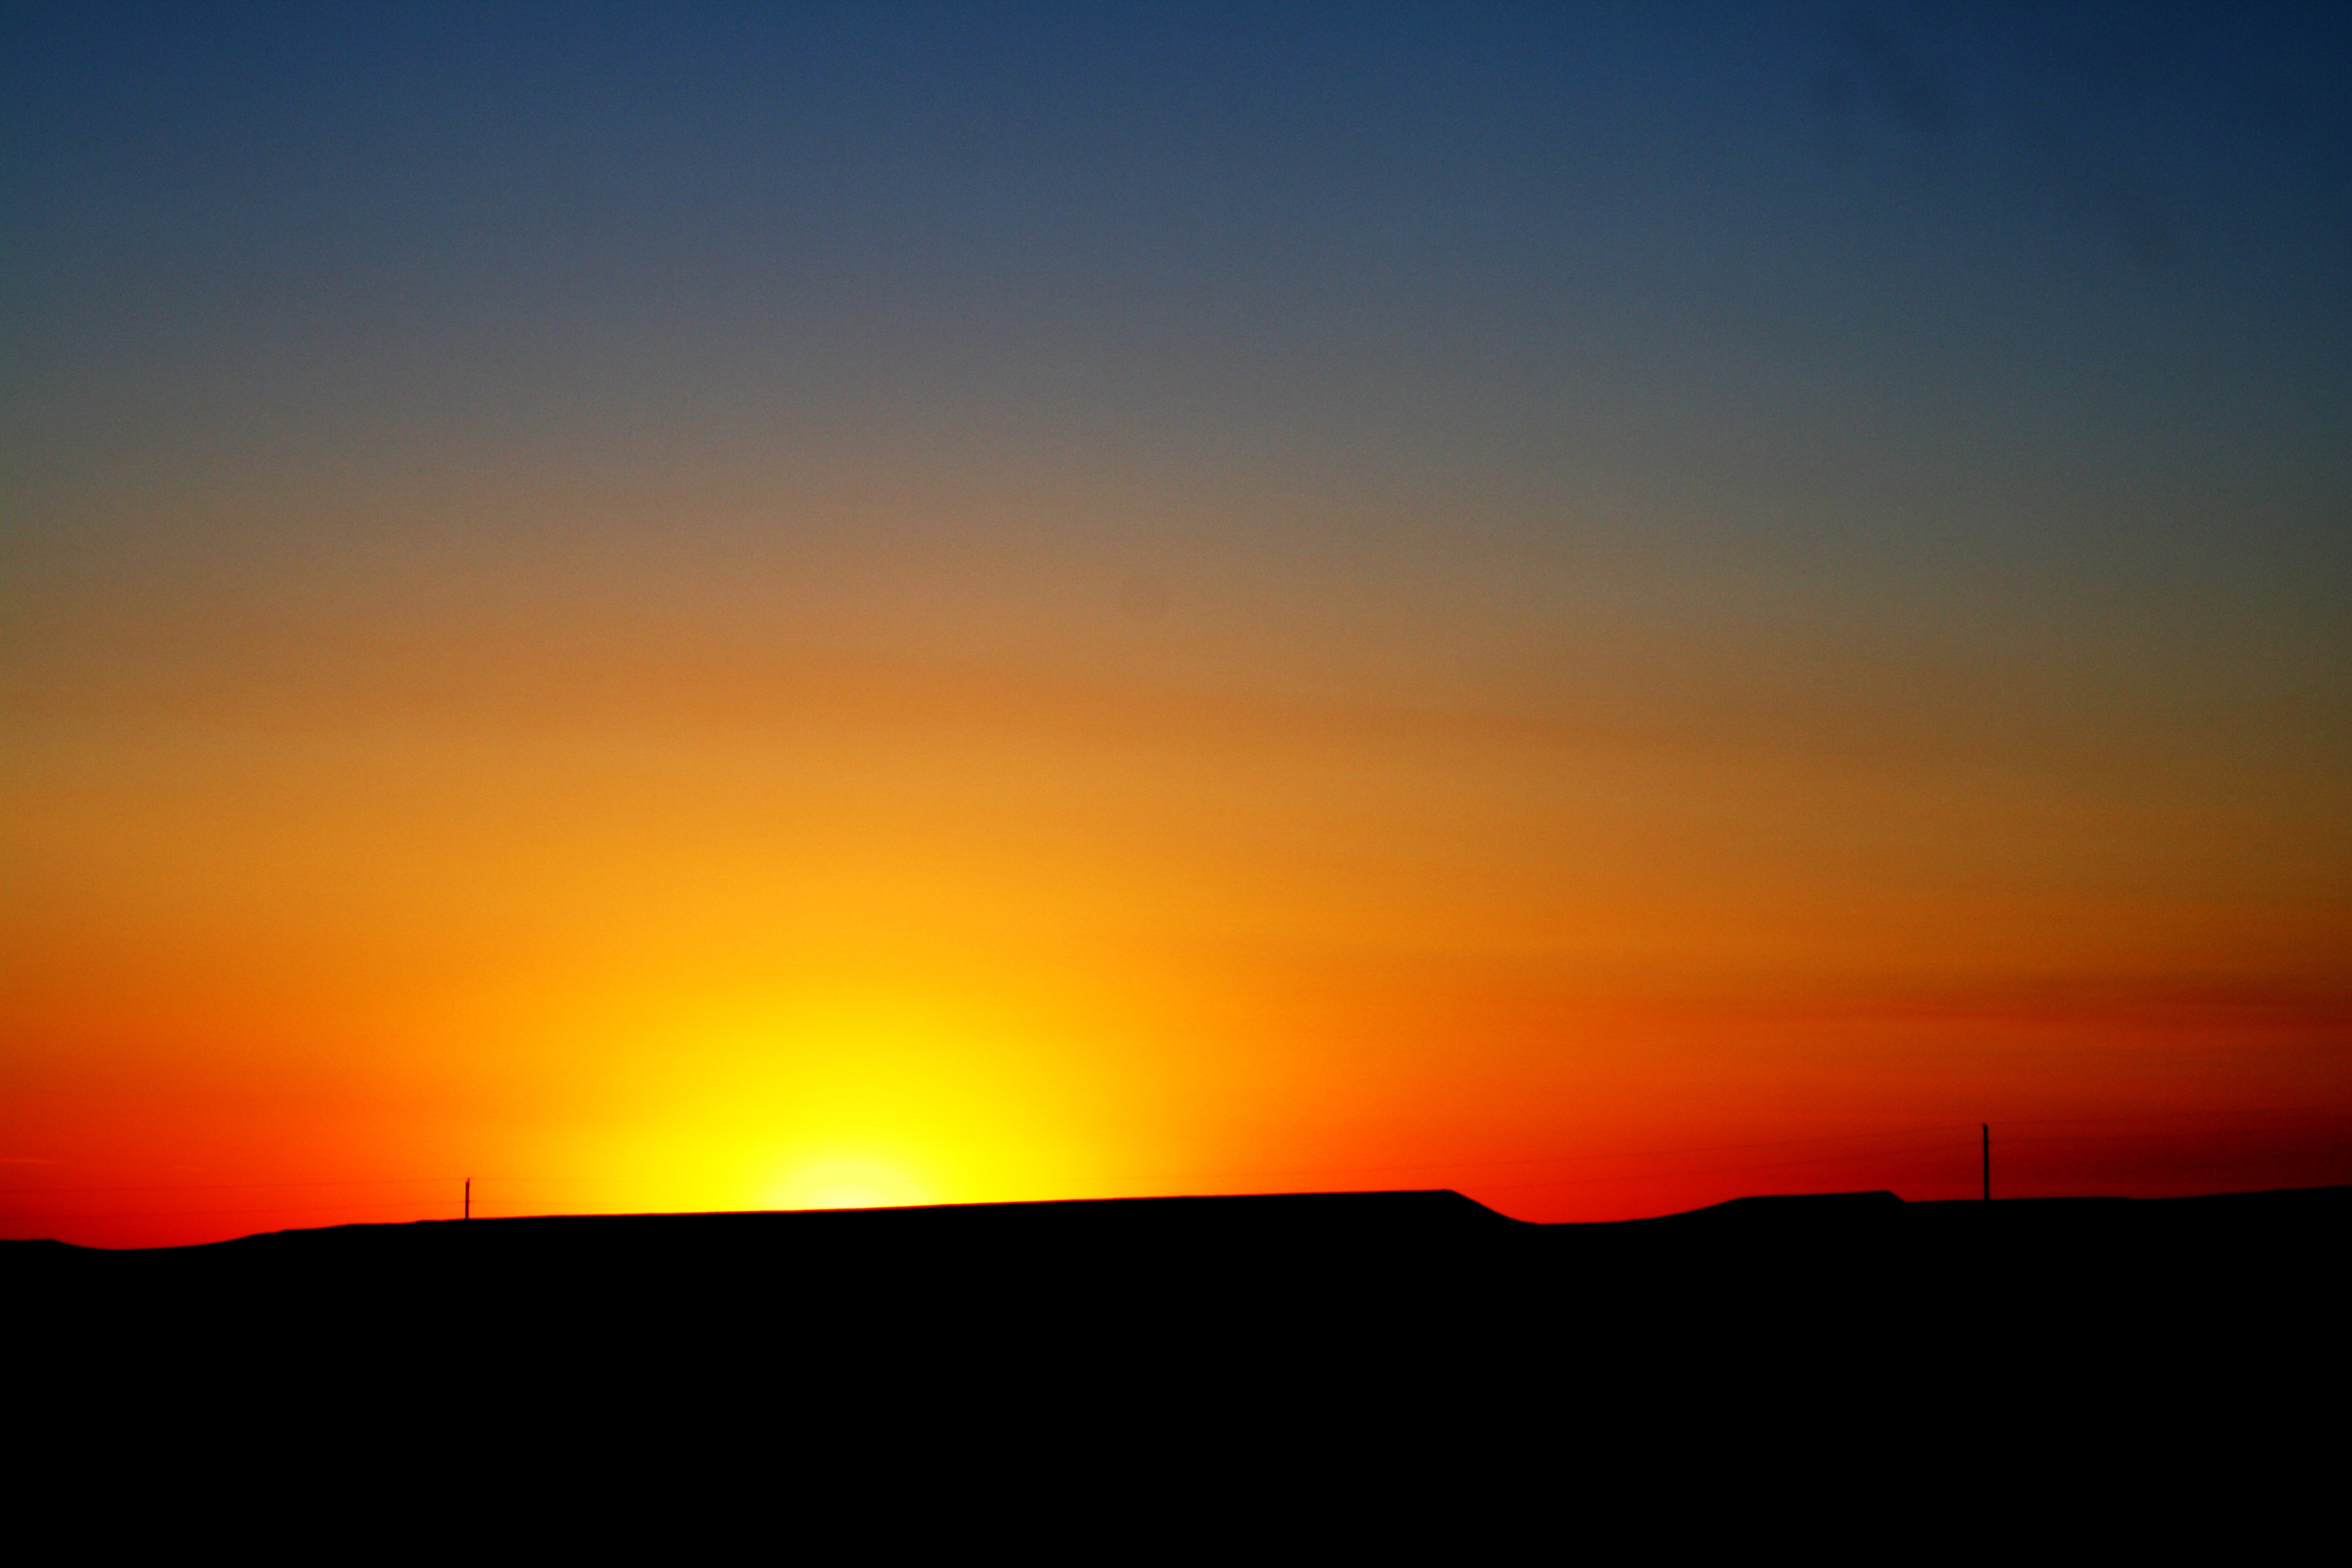 sunset, abstract, landscapes, western, Wyoming - desktop wallpaper